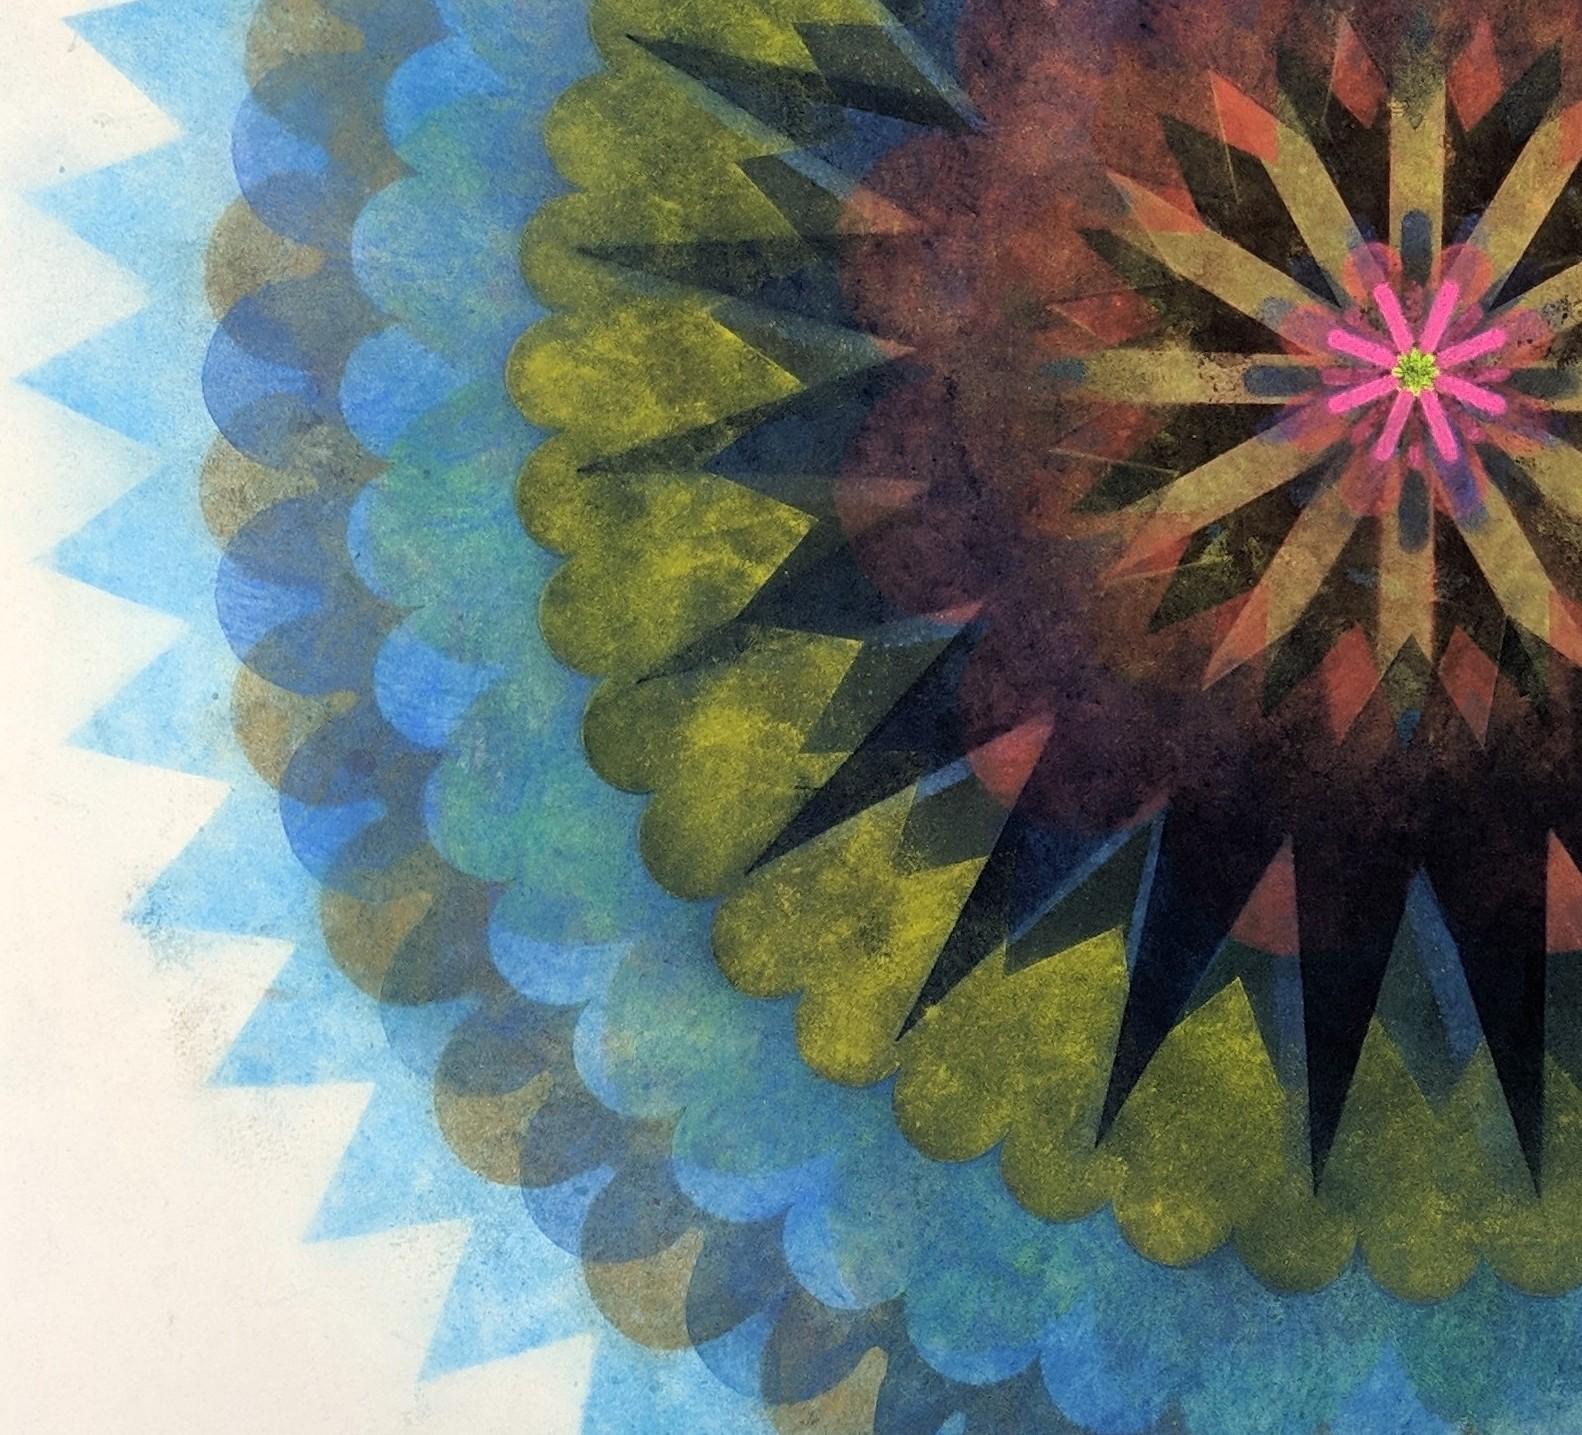 Pop Flower 61, Mandala in Bright Blue, Yellow, Brown, Neon Pink, Orange - Gray Abstract Drawing by Mary Judge